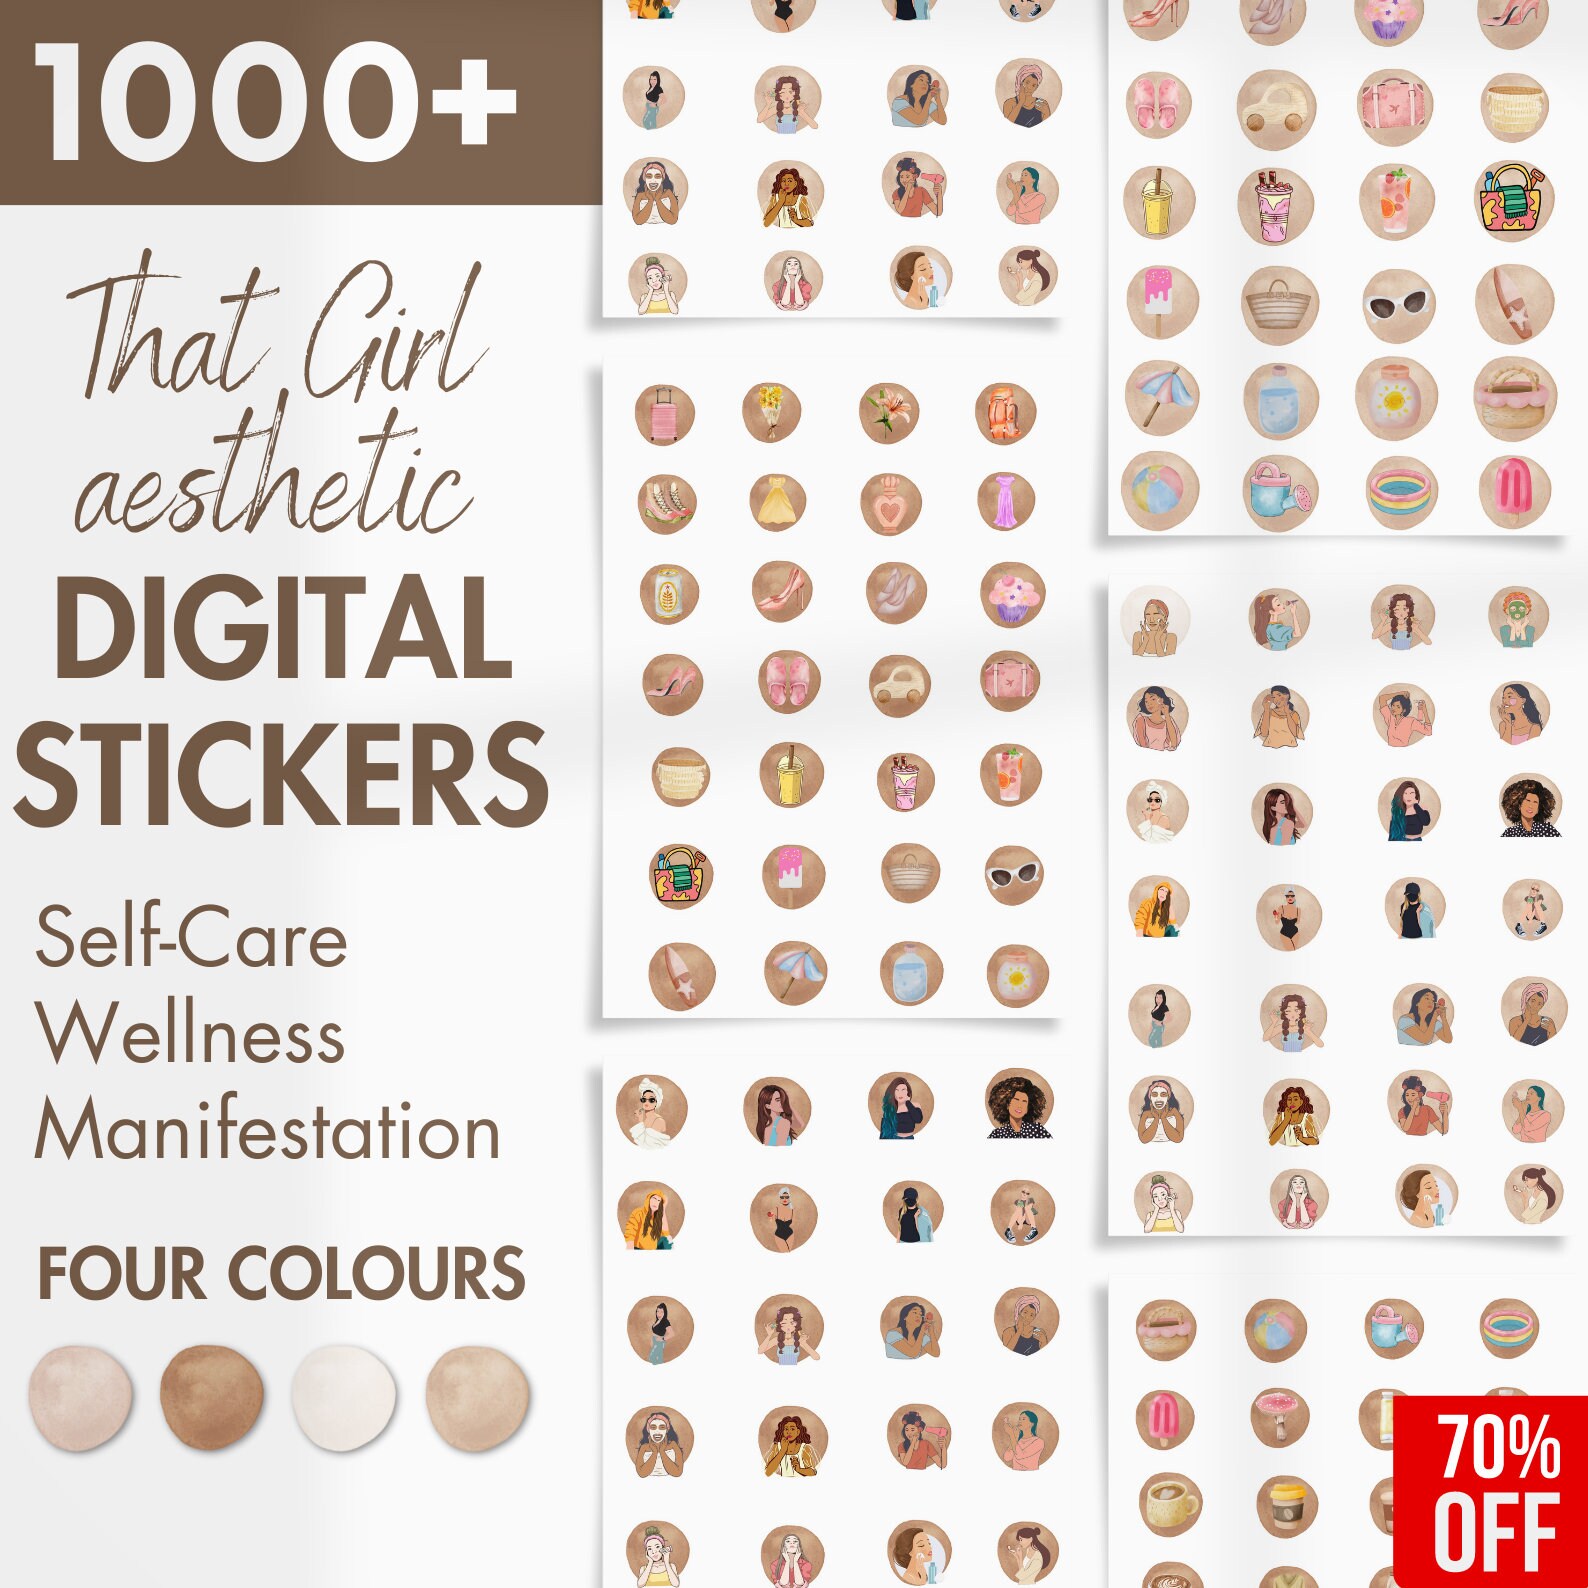 That Girl Aesthetic Digital Stickers